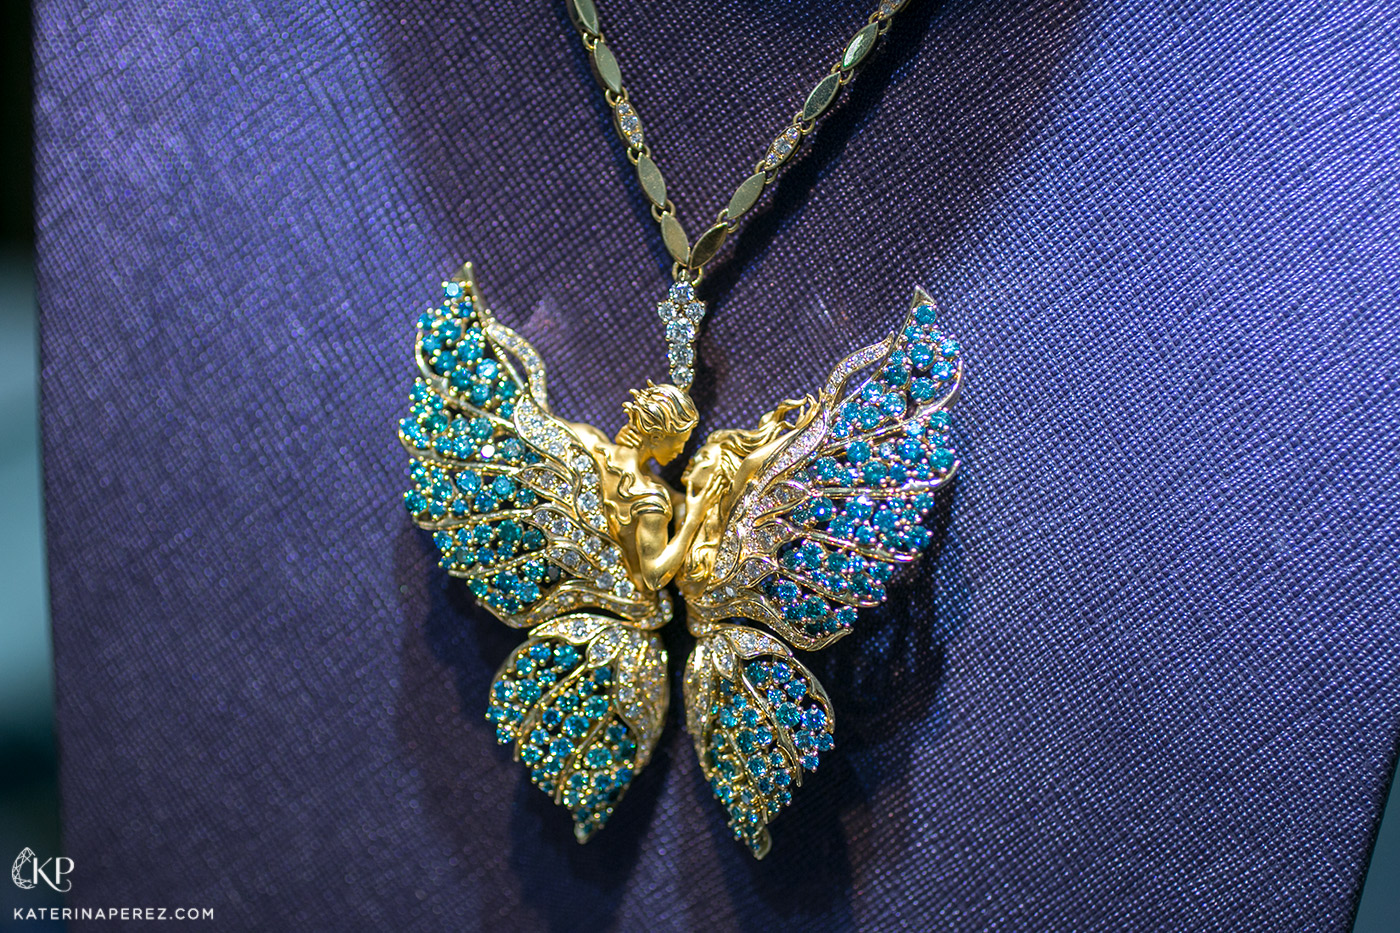 Magerit ‘Butterflies in Love’ necklace from the ‘Eternity’ collection with blue and colourless diamonds in 18k yellow gold